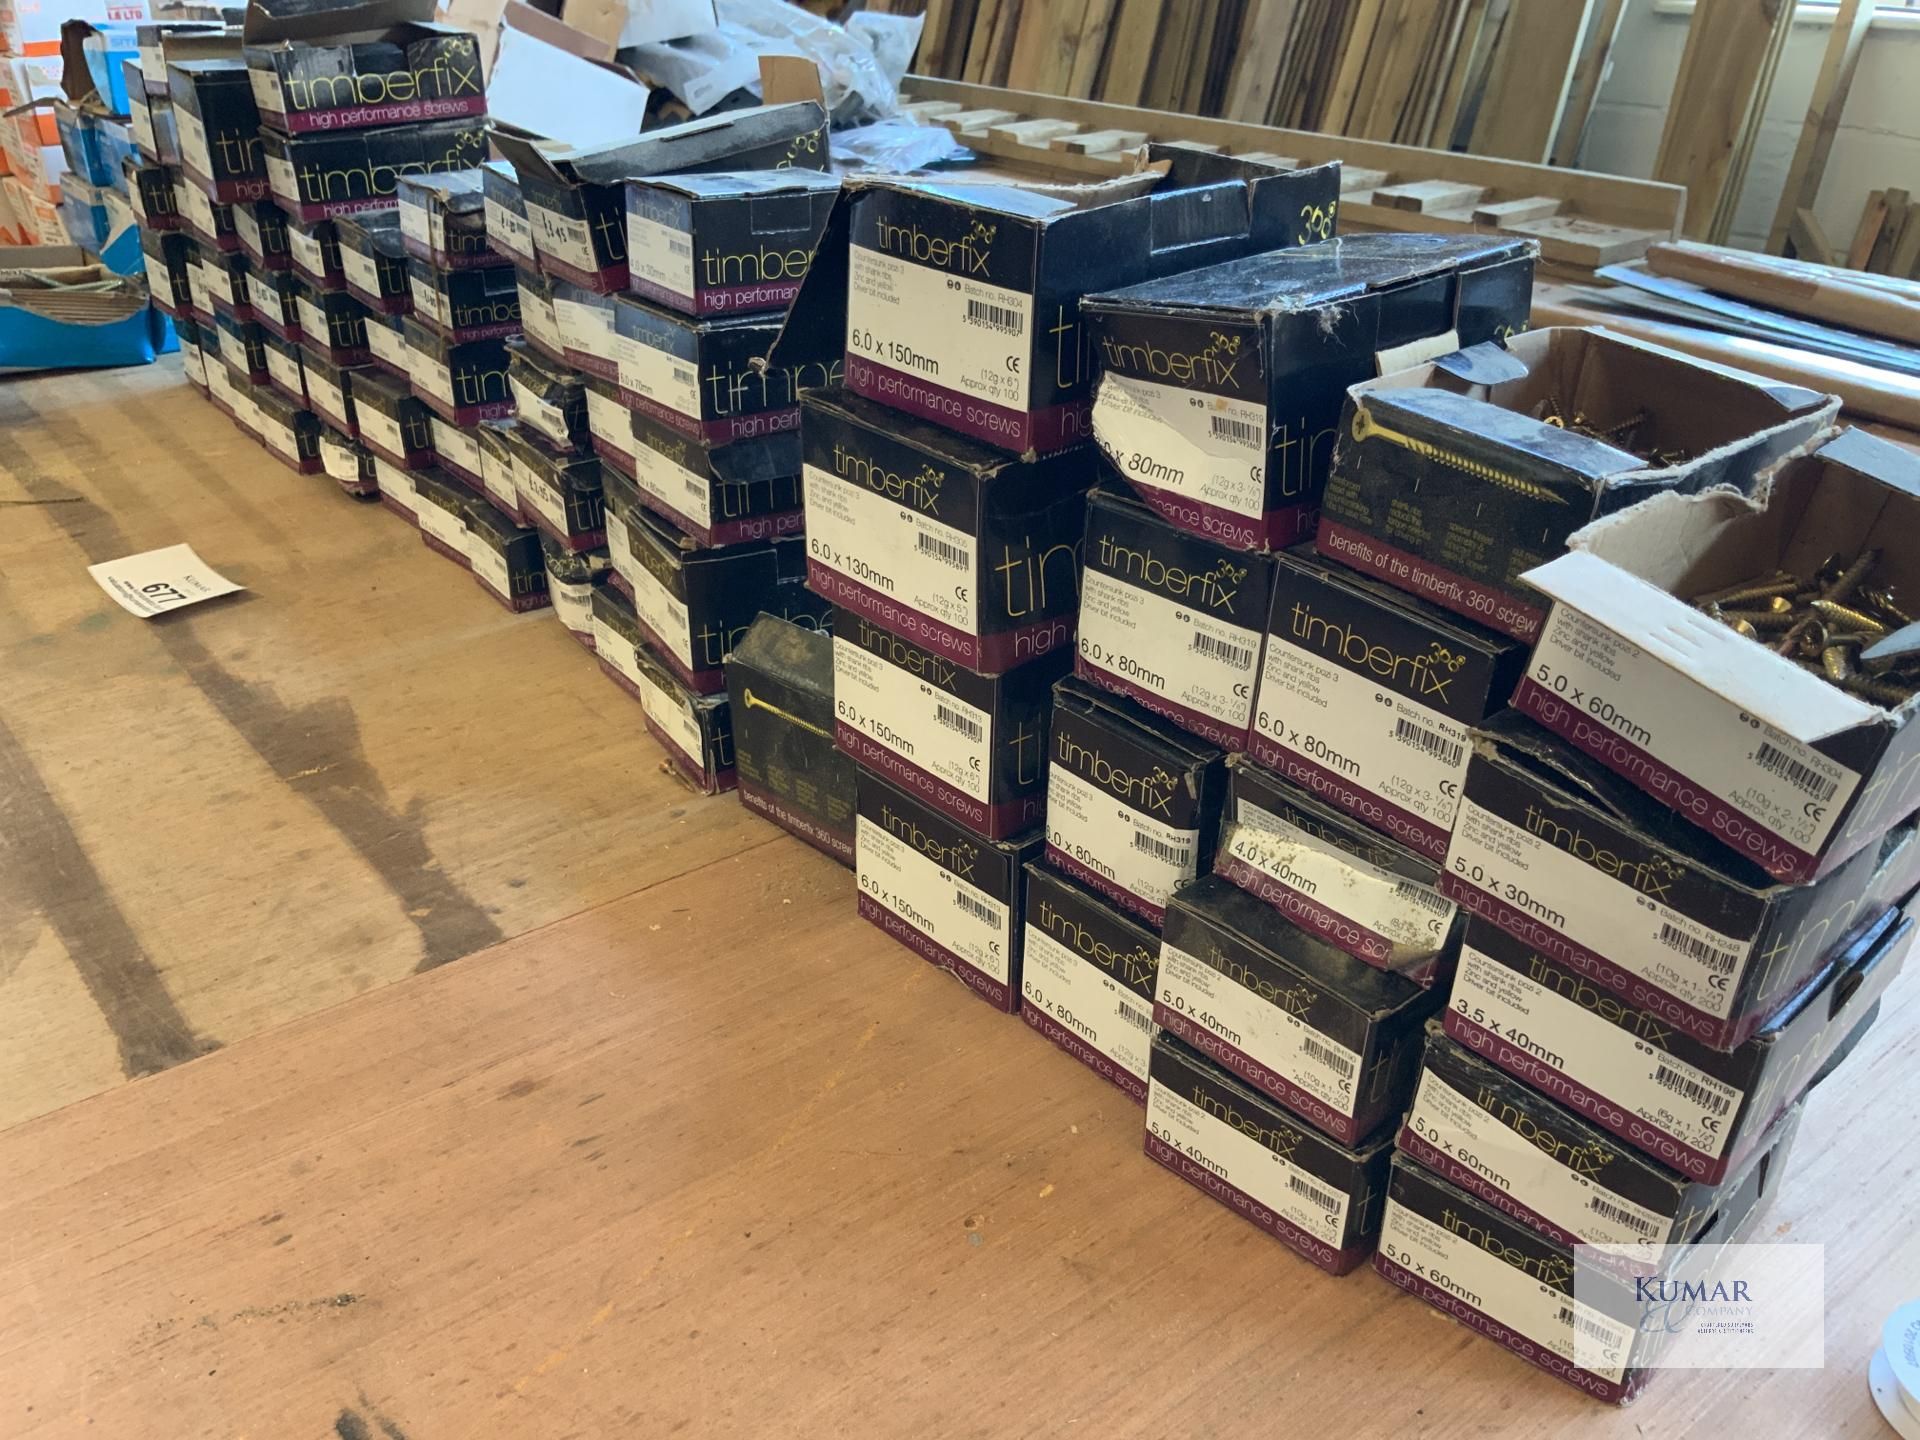 Approx 69 Half Boxes of Timberfix Performance Screws - Image 6 of 6